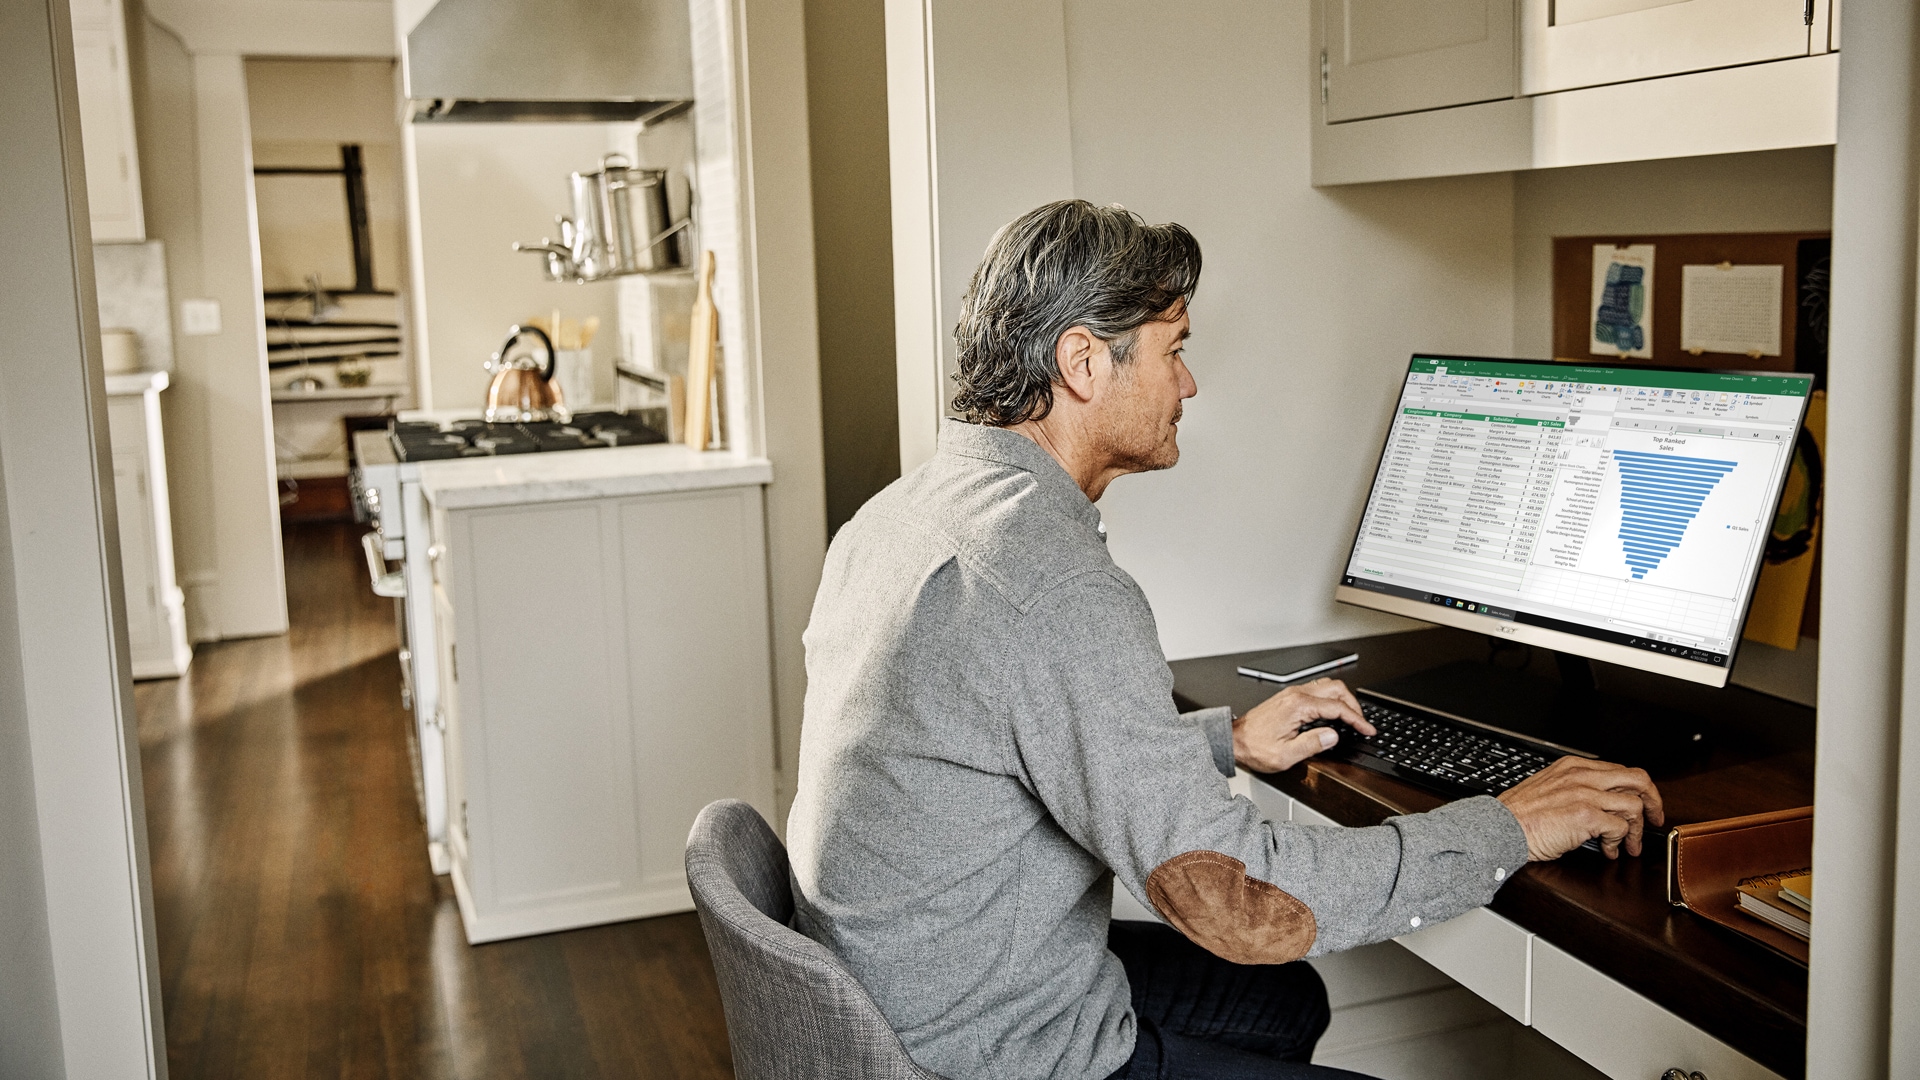 A person using Office applications on their Windows device